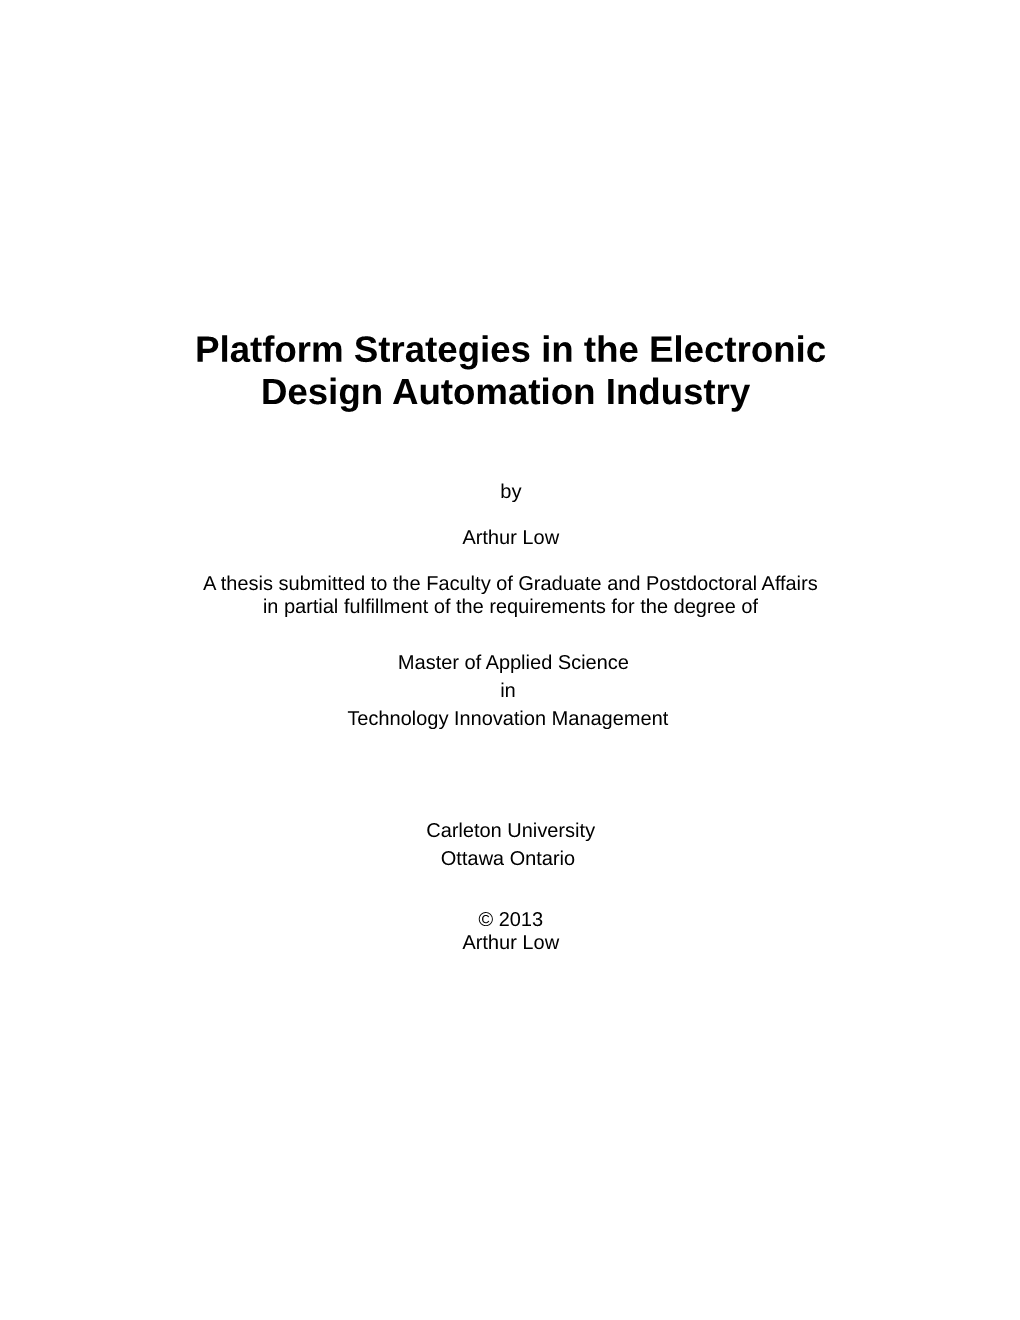 Platform Strategies in the Electronic Design Automation Industry